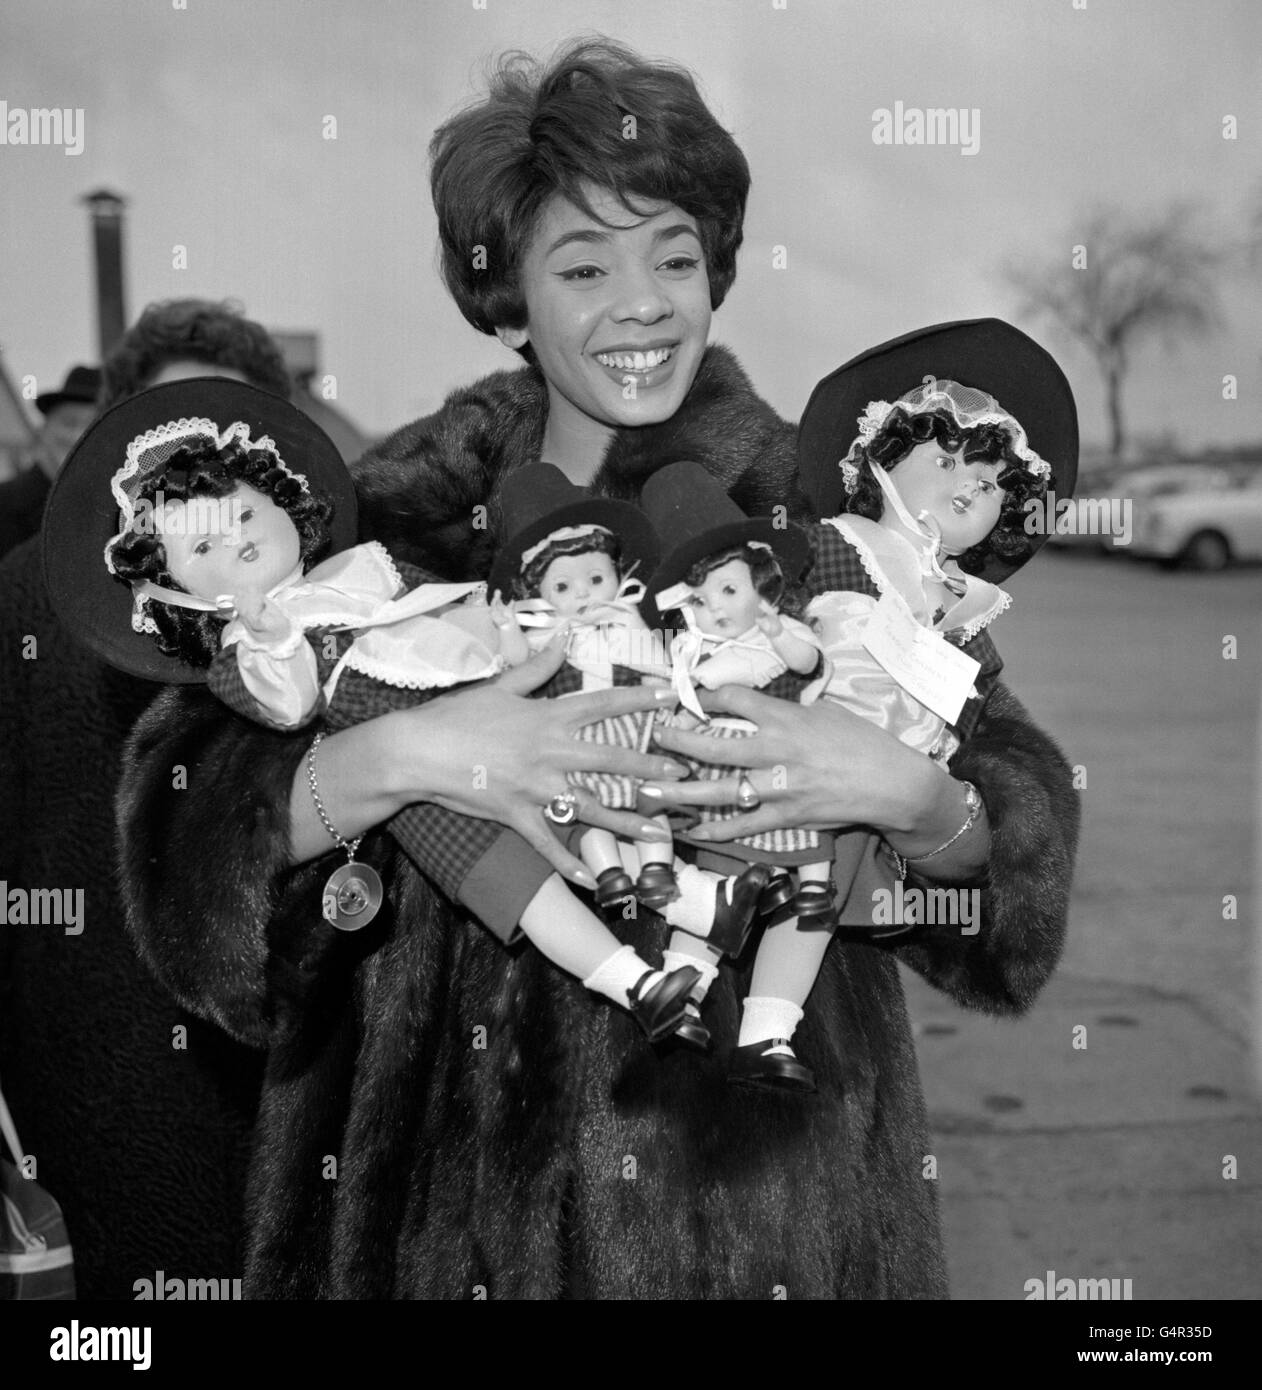 Singer Shirley Bassey has her arms full of dolls in Welsh national costume at London Airport, where she was about to board a Qantas Liner for Australia. On behalf of the Lord Mayor of Cardiff, her native city, she will present the dolls to the towns in which she appears during her Australian tour. Stock Photo